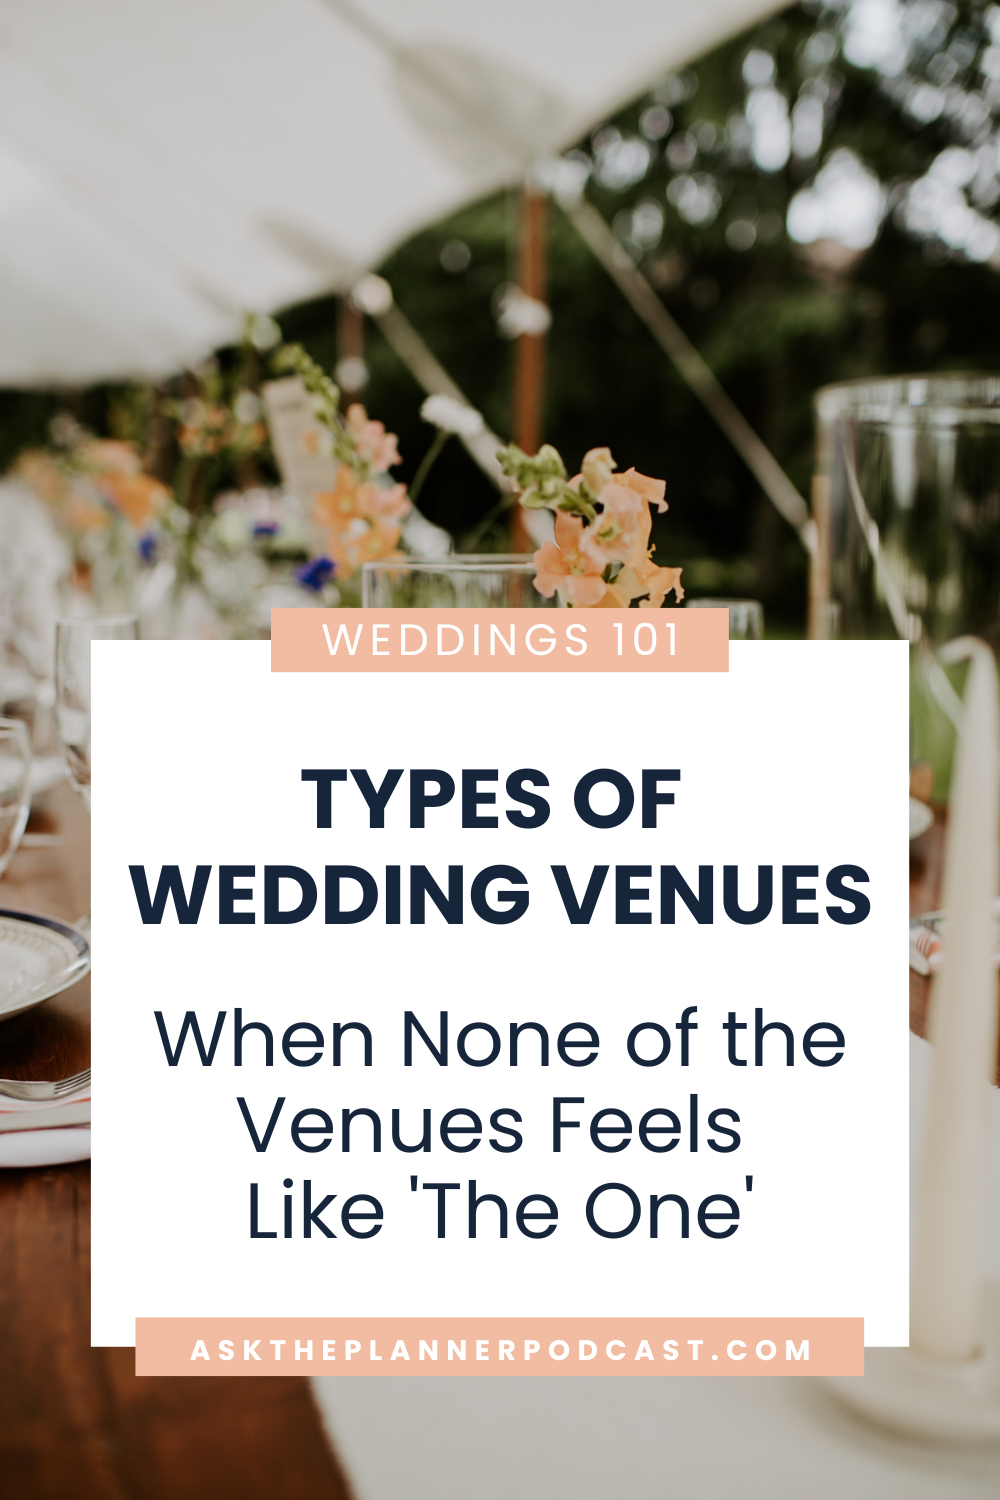 Different Types of Wedding Venues